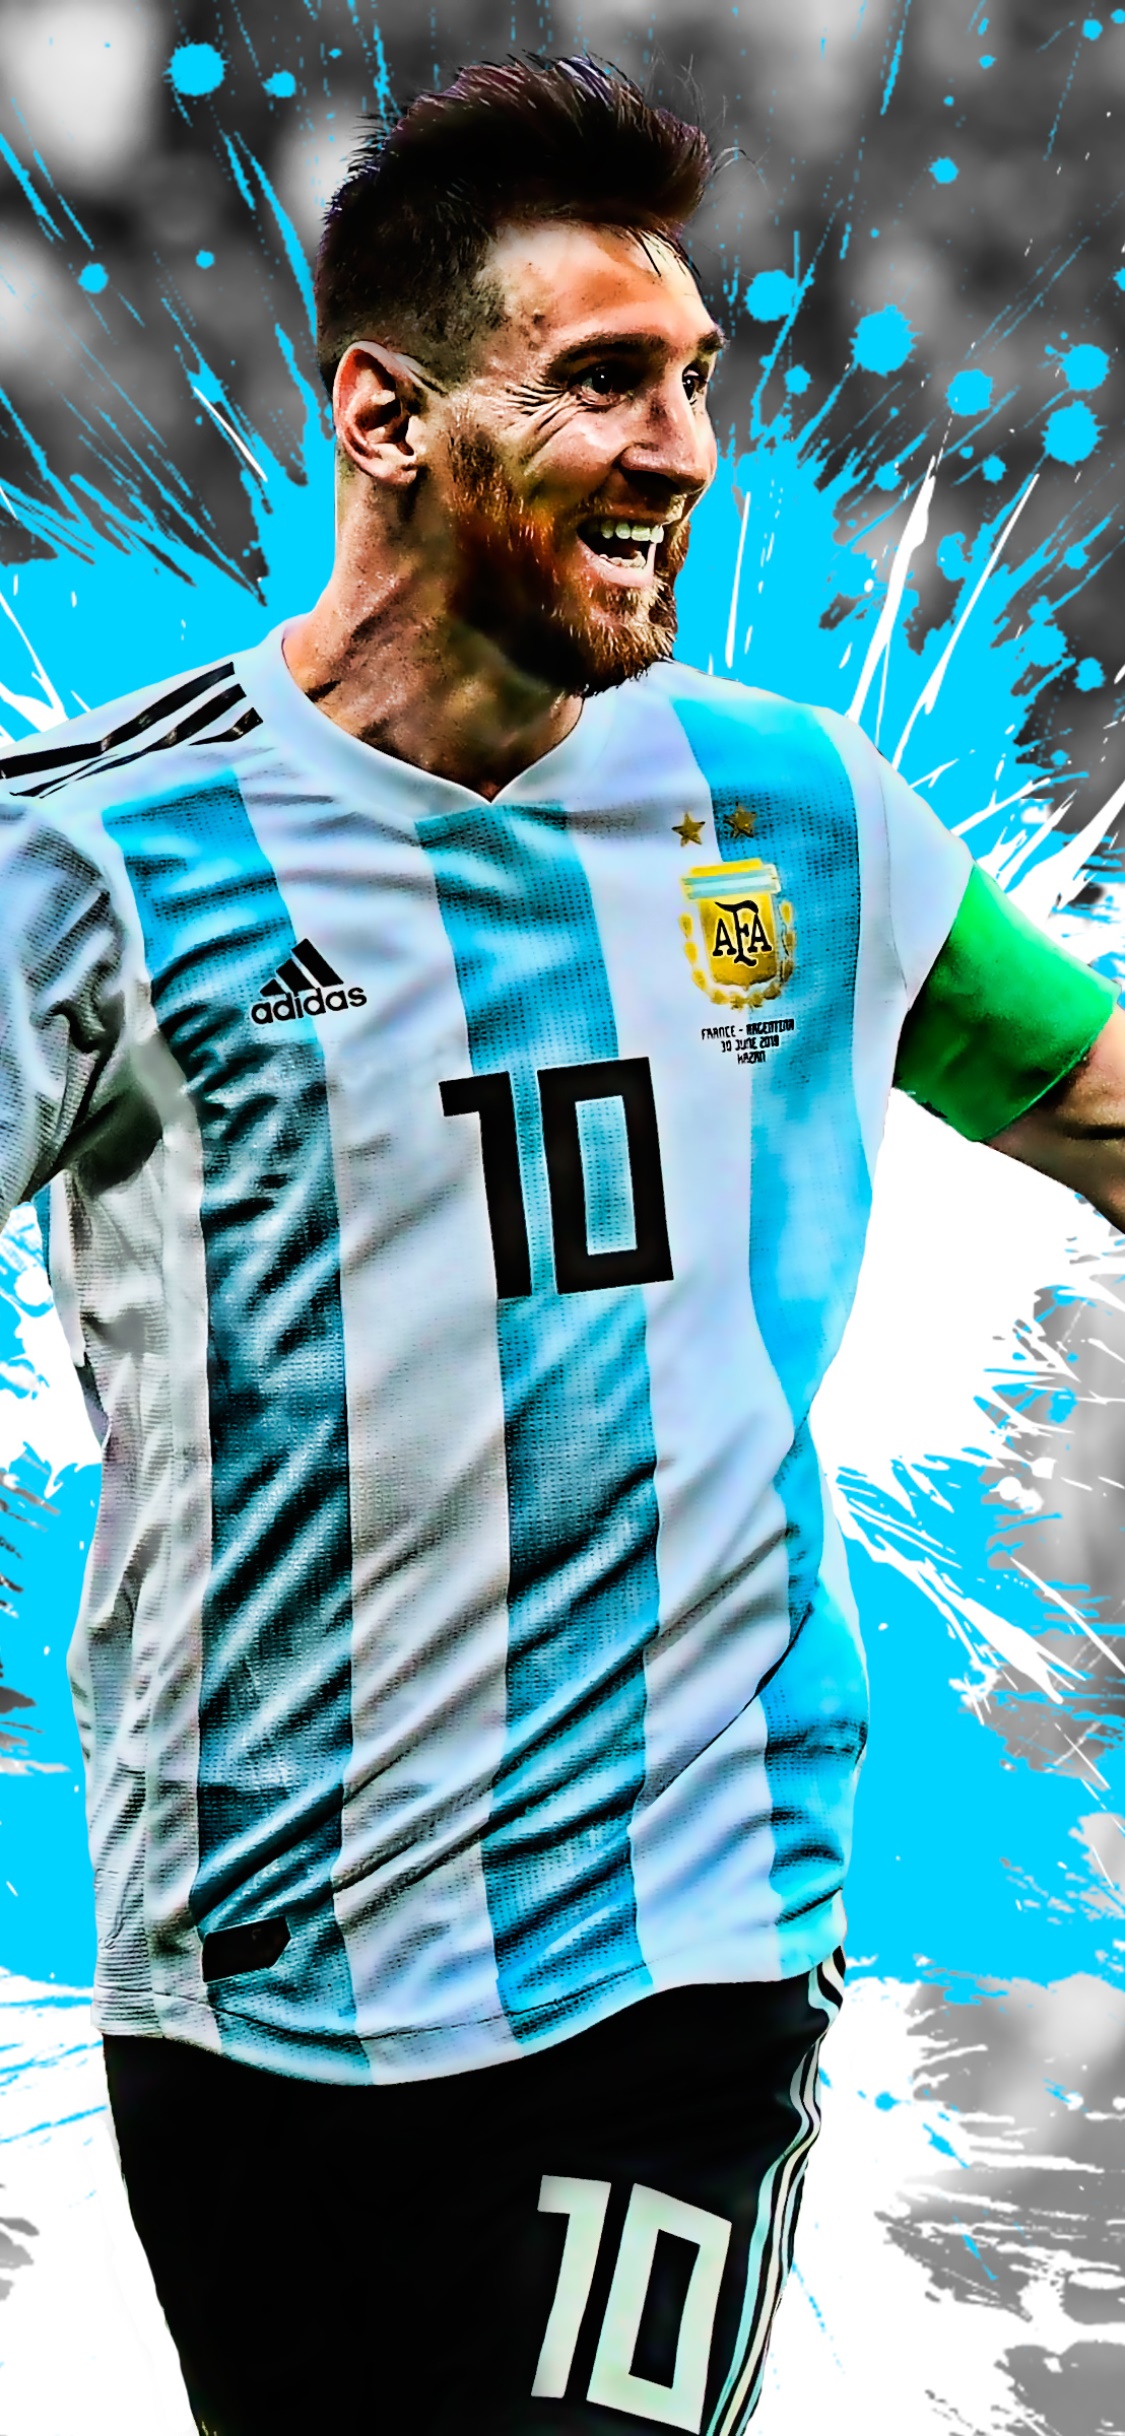 Wallpaper / Sports Lionel Messi Phone Wallpaper, Soccer, Argentina National Football Team, 1125x2436 free download